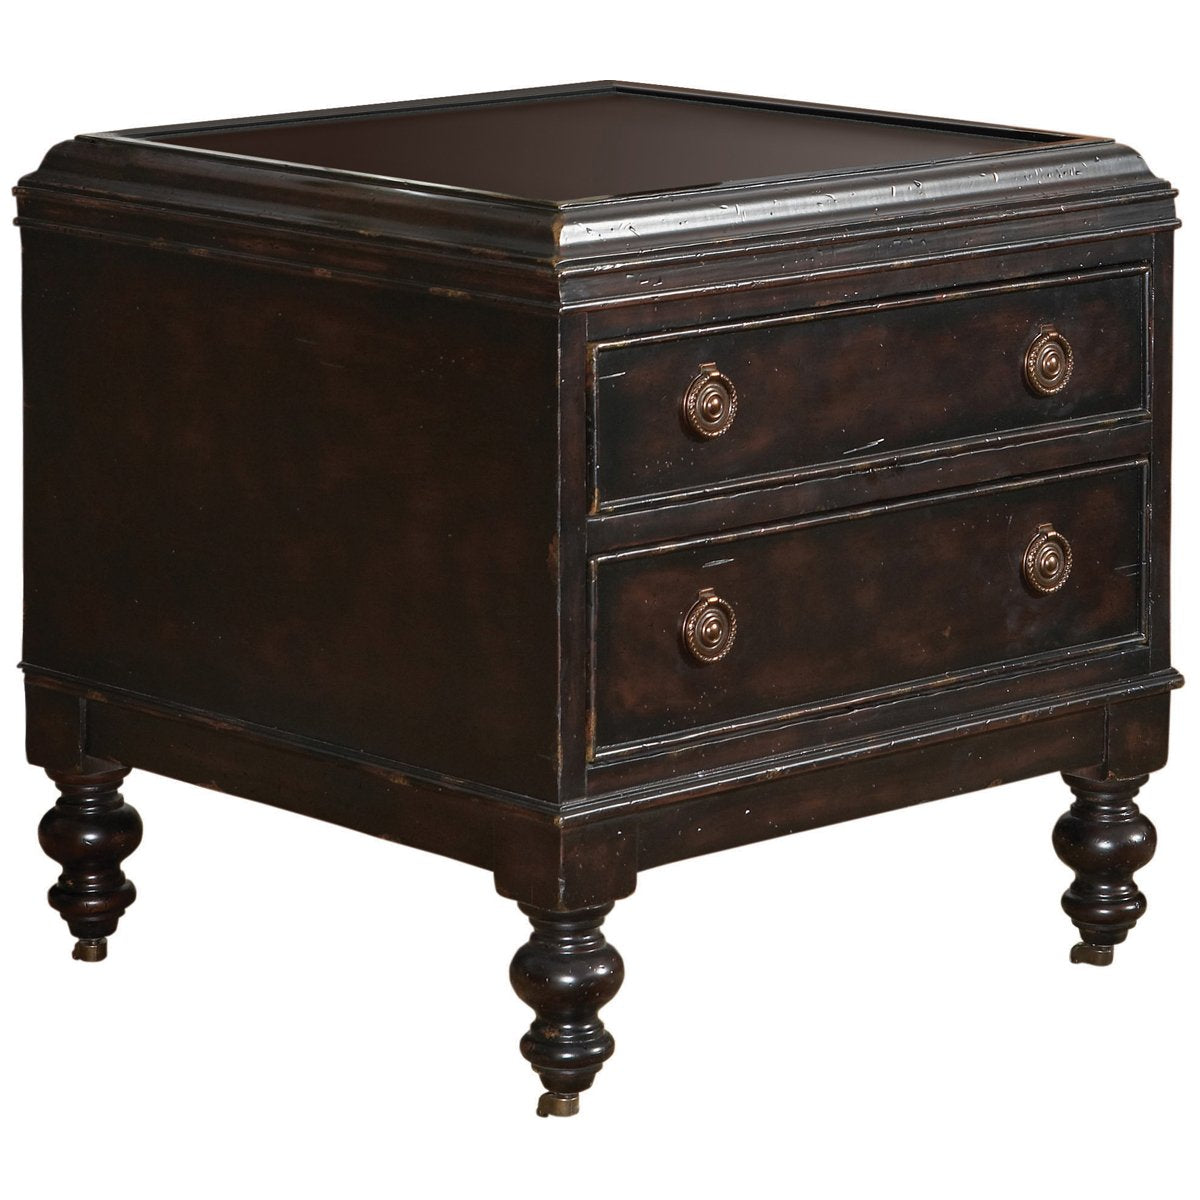 Tommy Bahama Kingstown Nelson End Table